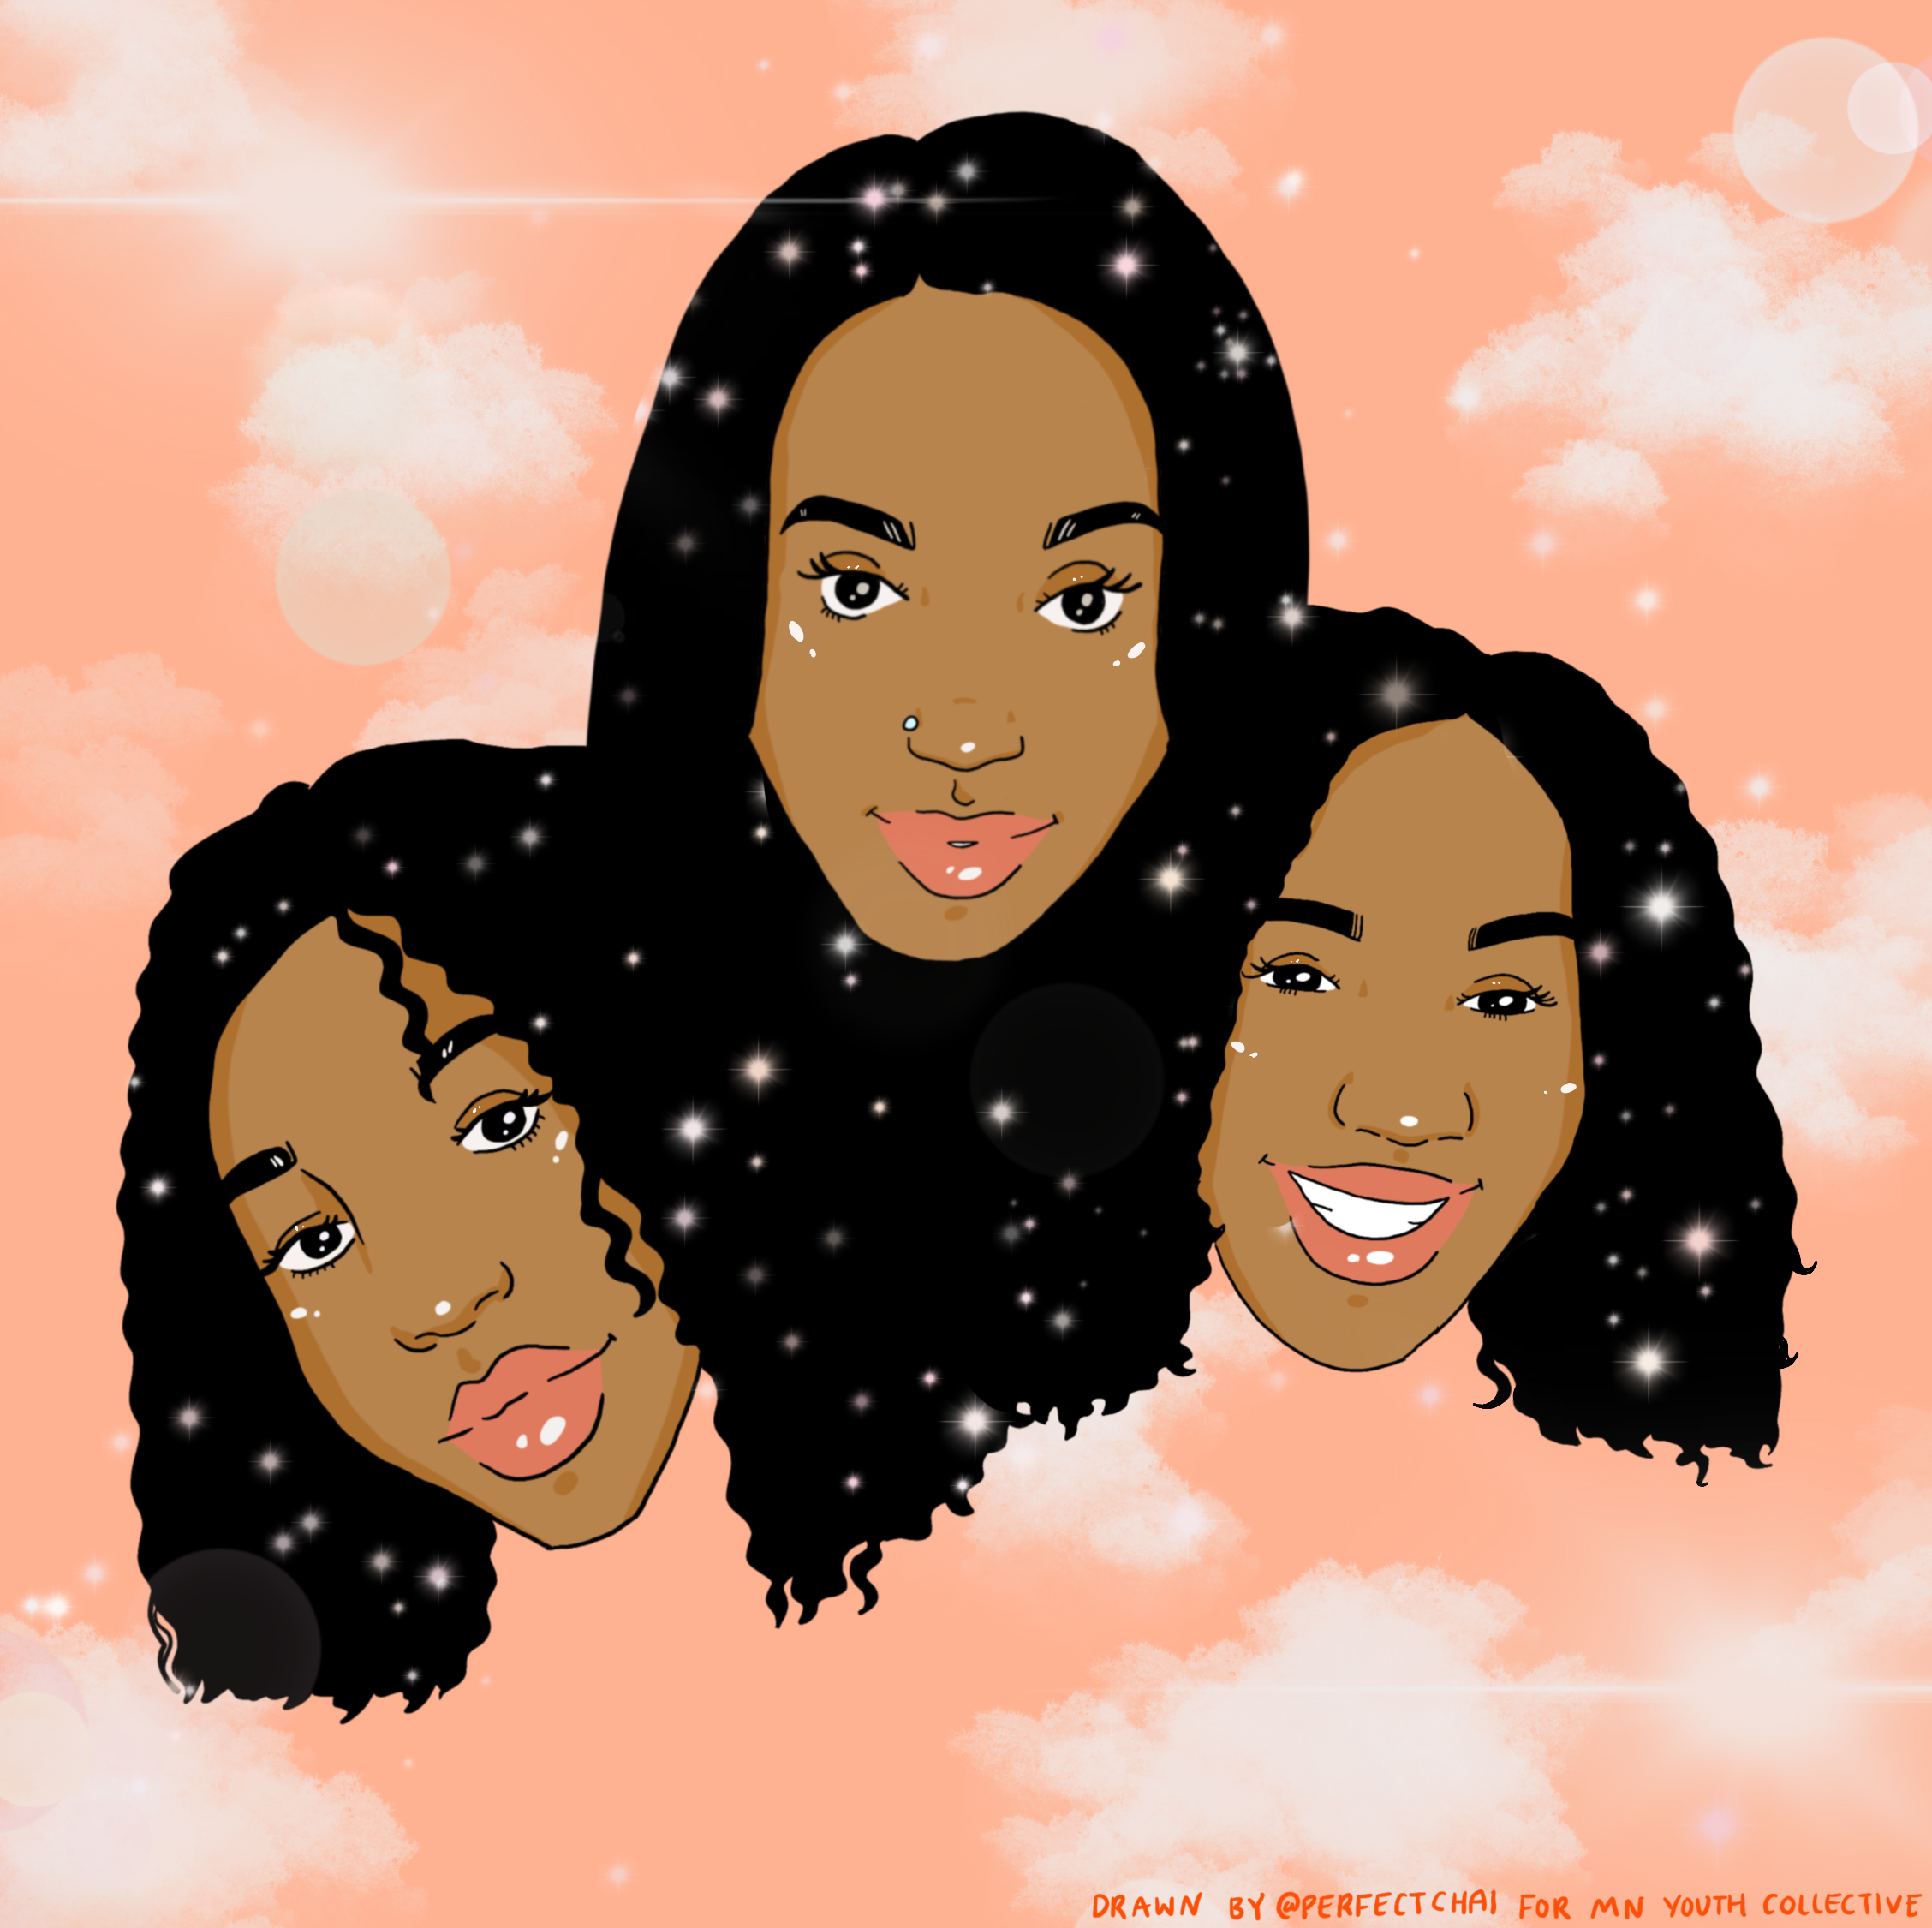 An Illustration of 3 women surrounded by clouds on a peach background